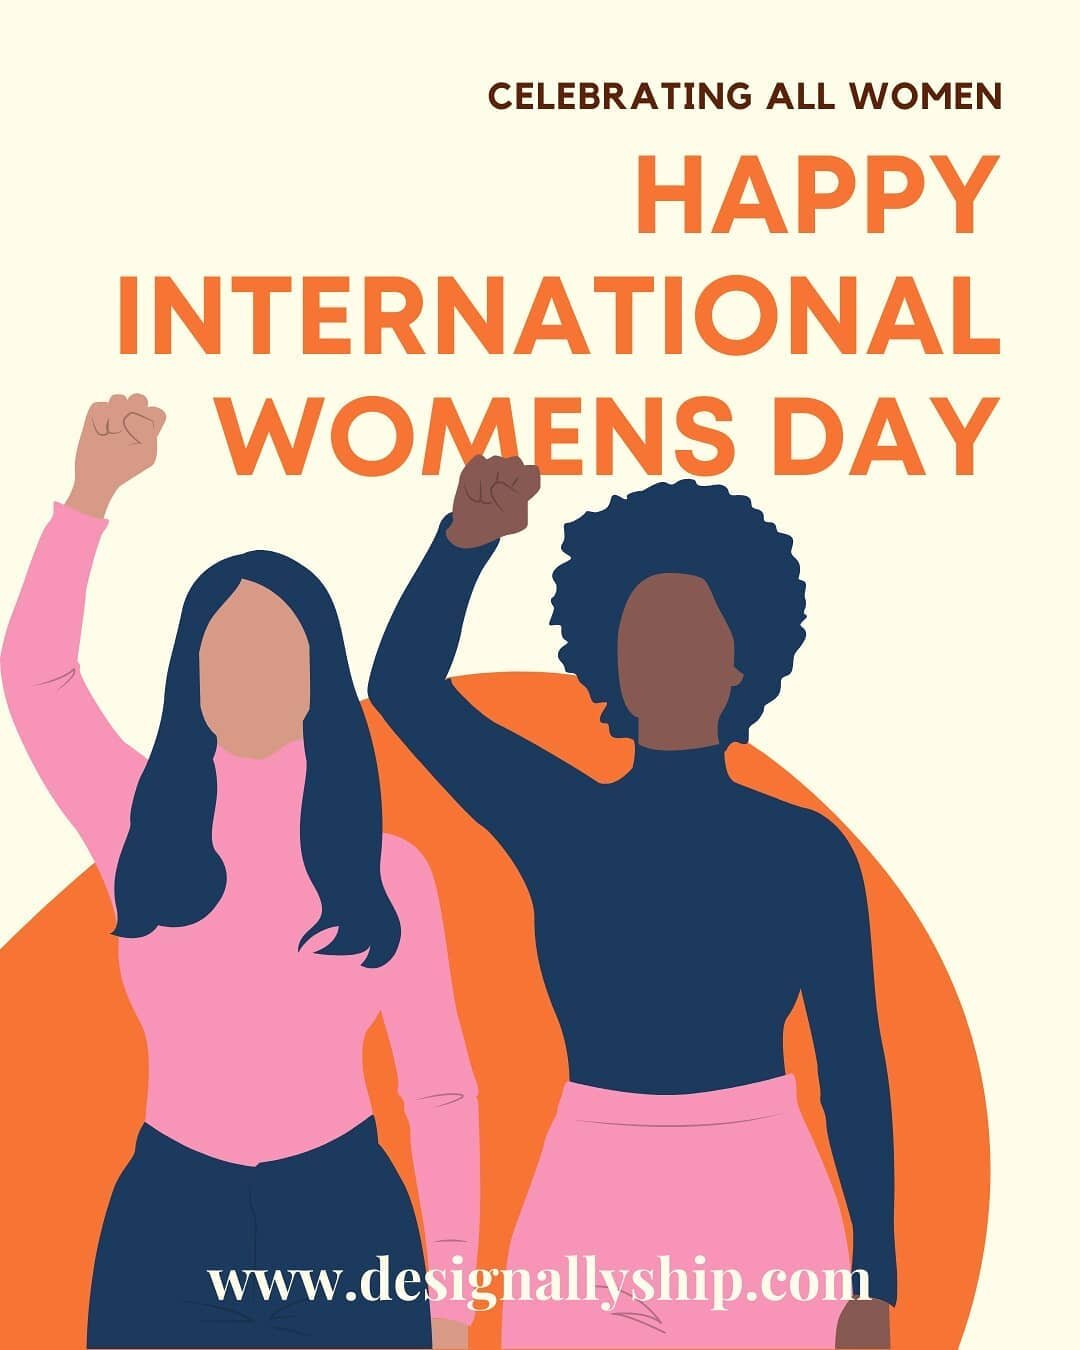 Happy International Women's Day from your friends at Design Allyship! International Women's Day is a day to reflect on how far we have come, to call for change, and to celebrate the acts of courage and determination by women throughout history who ha